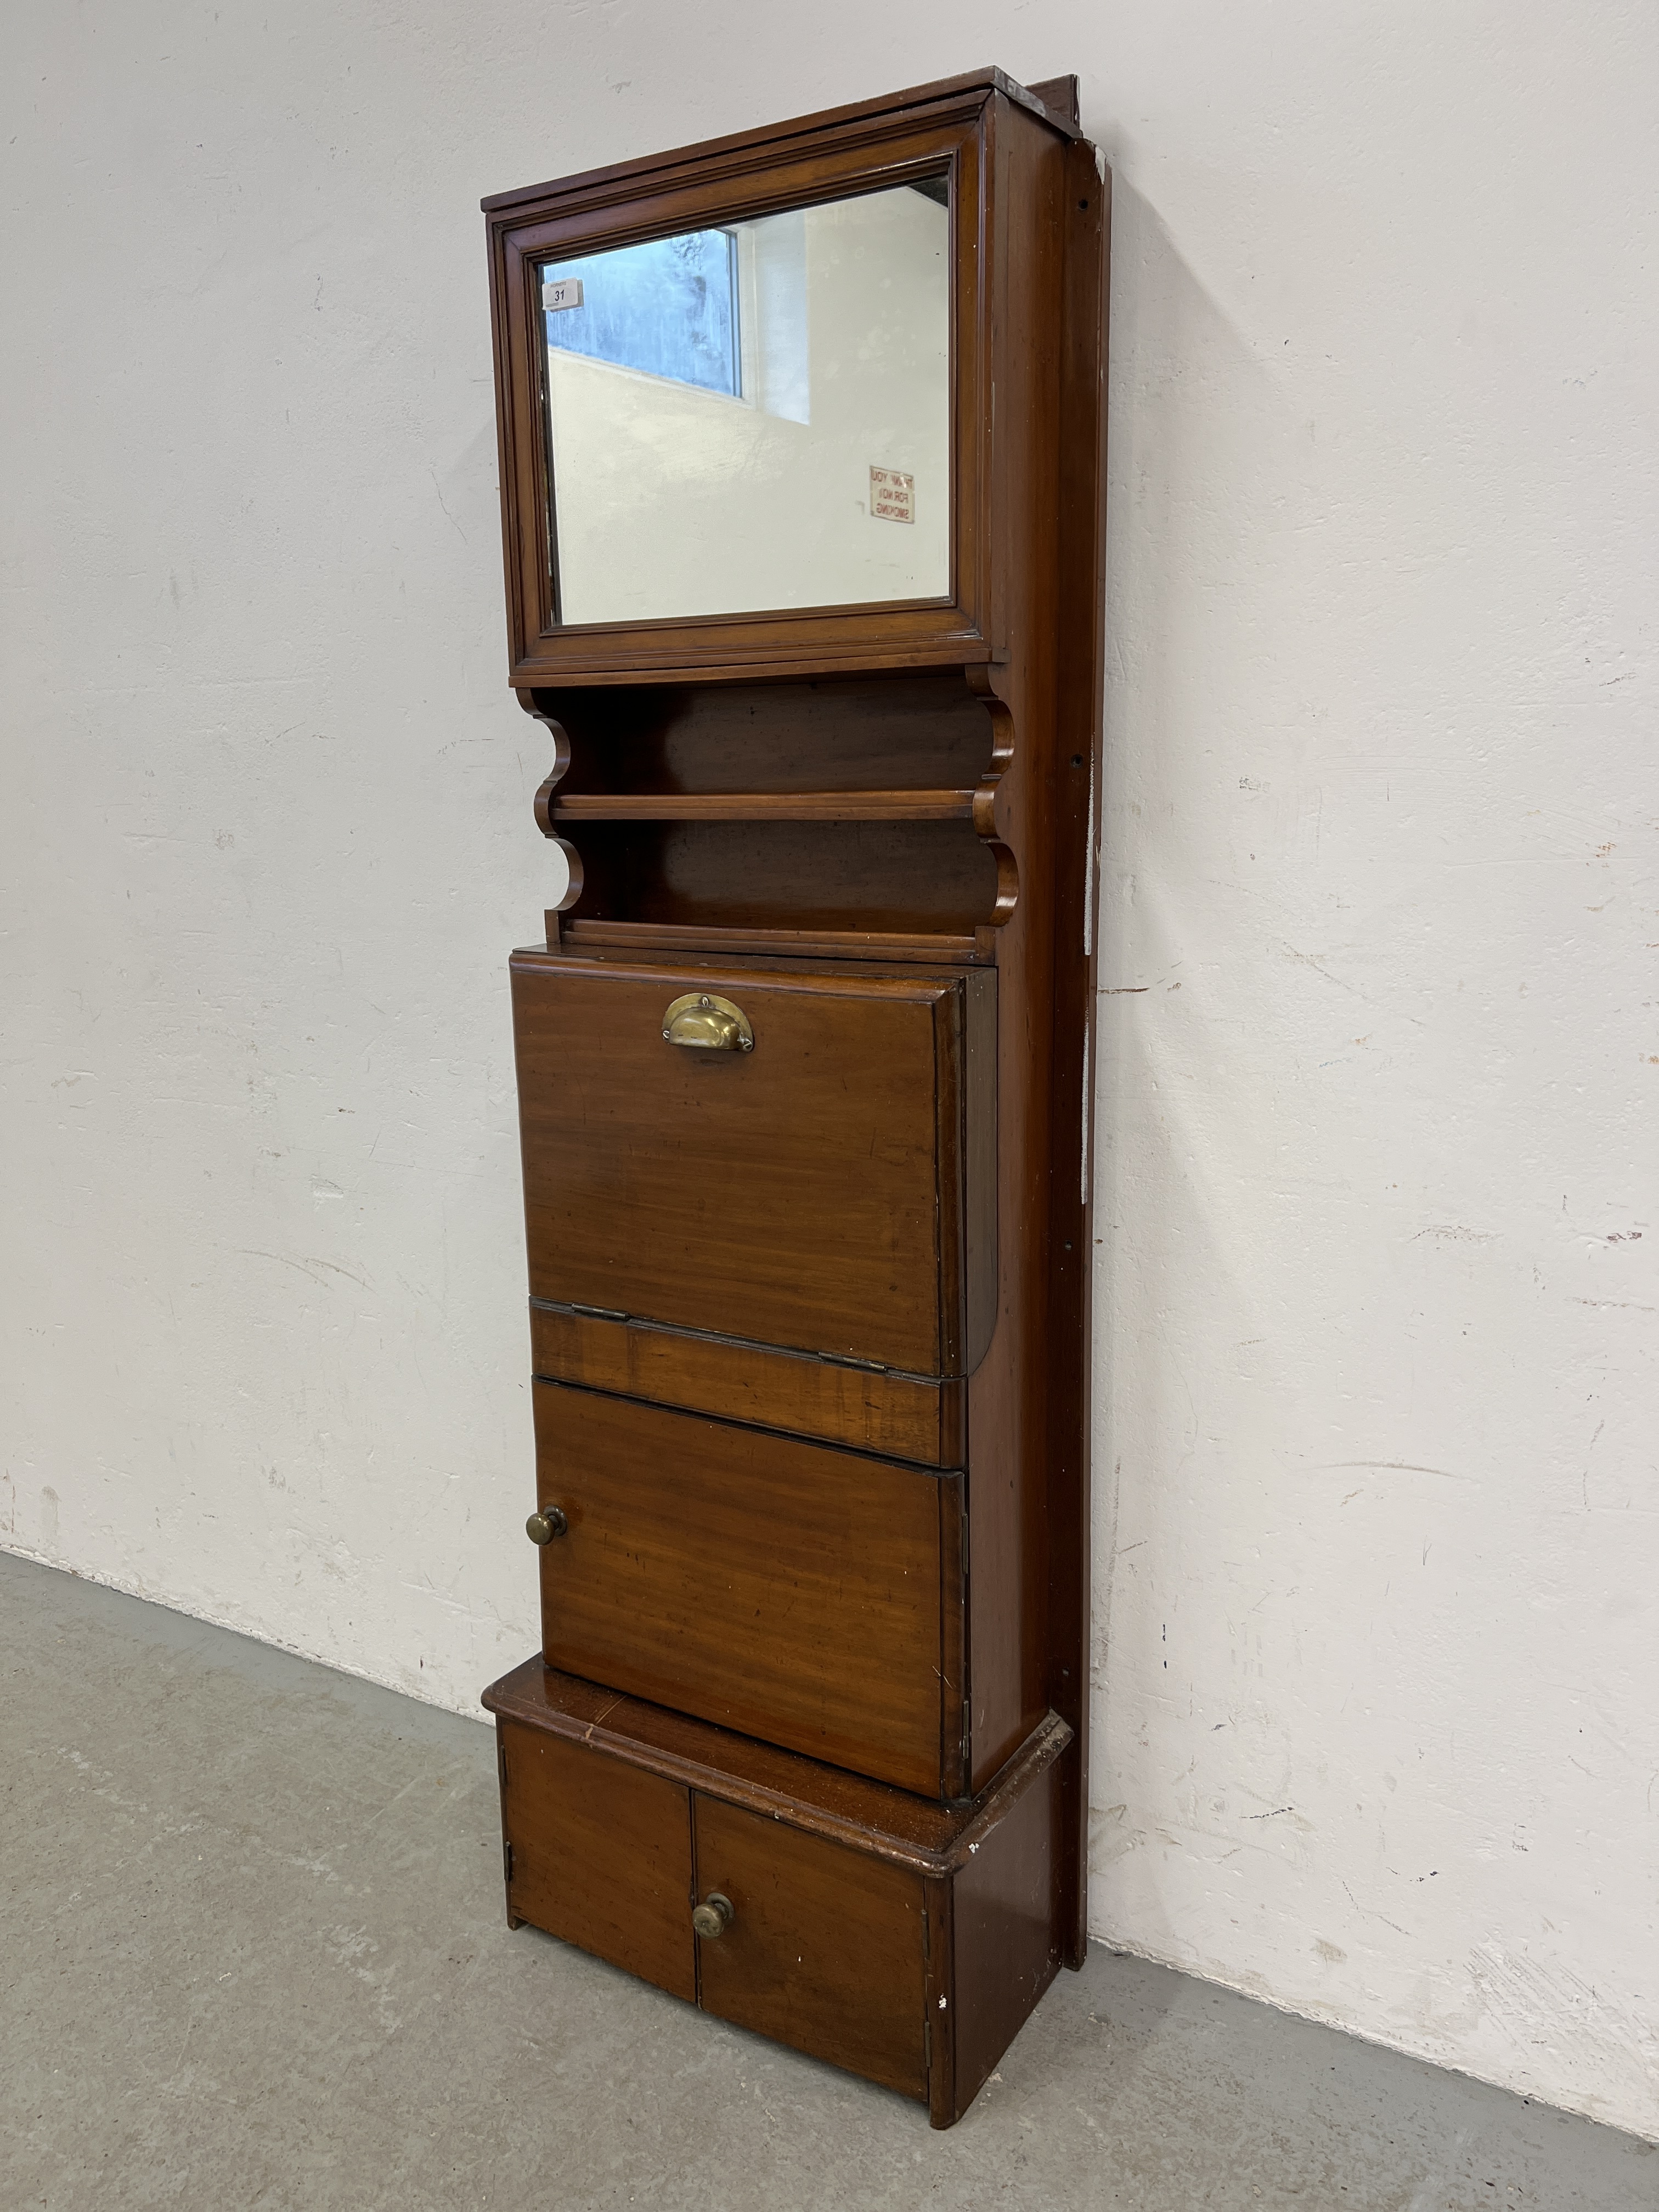 A VICTORIAN MAHOGANY SHIP'S WASH STAND WITH MIRRORED DOOR ABOVE - W 54CM X D 29CM X H 164CM. - Image 2 of 9